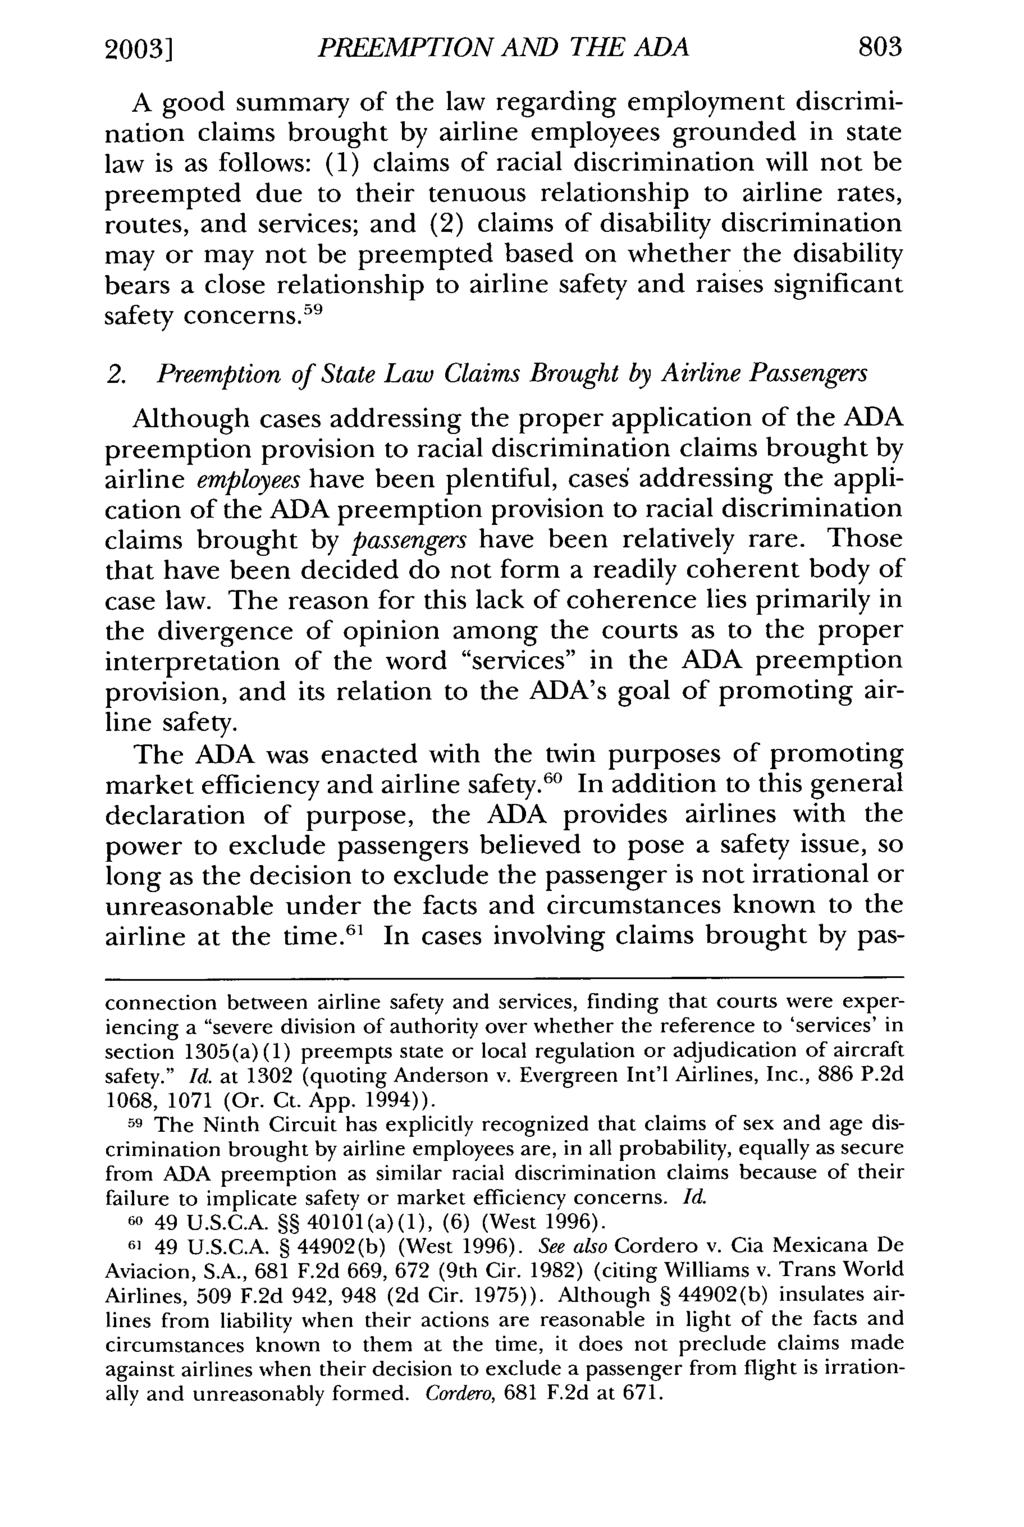 20031 PREEMPTION AND THE ADA 803 A good summary of the law regarding employment discrimination claims brought by airline employees grounded in state law is as follows: (1) claims of racial